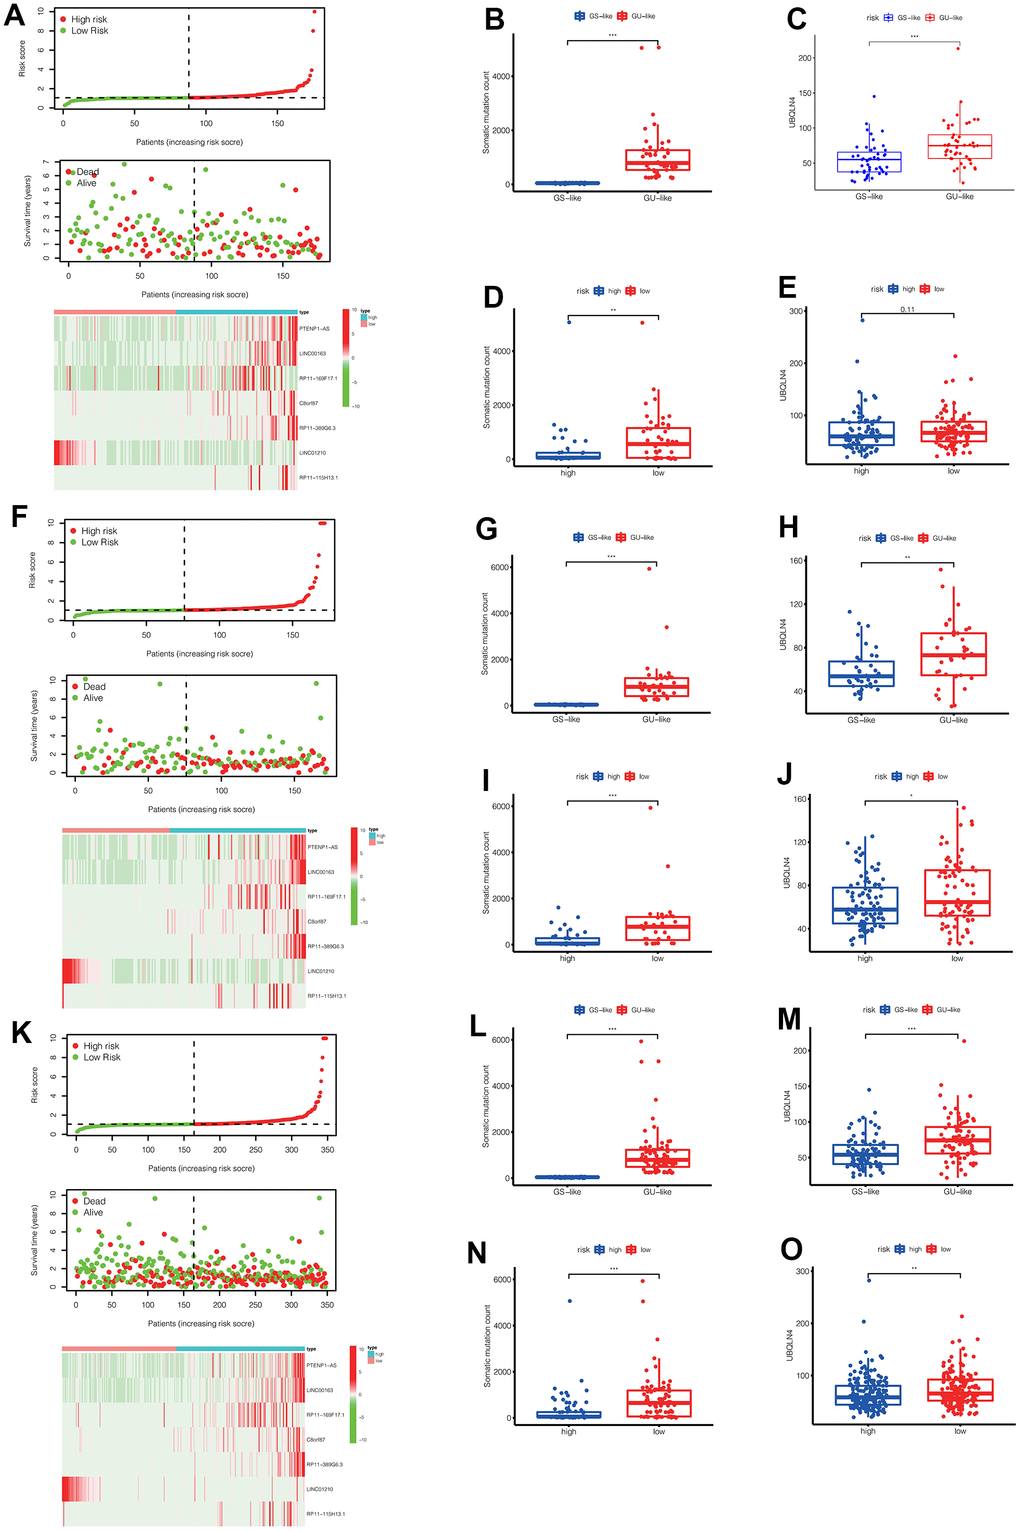 (A) In the training set, we can see the distribution of patient survival and death as the risk score increased, as well as the heat map of lncRNAs expression in the high-risk and low-risk groups. (B, C) In the training set, the number of somatic mutations and the expression of UBQLN4 gene were different between the GS-like group and the Gu-like group (** ppD, E) In the training set, the number of somatic mutations and the expression of UBQLN4 gene were different between the high-risk group and the low-risk group (** ppF) In the validation set, we can see the distribution of patient survival and death as the risk score increased, as well as the heat map of lncRNAs expression in the high-risk and low-risk groups. (G, H) In the validation set, the number of somatic mutations and the expression of UBQLN4 gene were different between the GS-like group and the Gu-like group (** p pI, J) In the validation set, the number of somatic mutations and the expression of UBQLN4 gene were different between the high-risk group and the low-risk group (** p p K) In the entire set, we can see the distribution of patient survival and death as the risk score increased, as well as the heat map of lncRNAs expression in the high-risk and low-risk groups. (L, M) In the entire set, the number of somatic mutations and the expression of UBQLN4 gene were different between the GS-like group and the Gu-like group (** pp N, O) In the entire set, the number of somatic mutations and the expression of UBQLN4 gene were different between the high-risk group and the low-risk group (** p p 